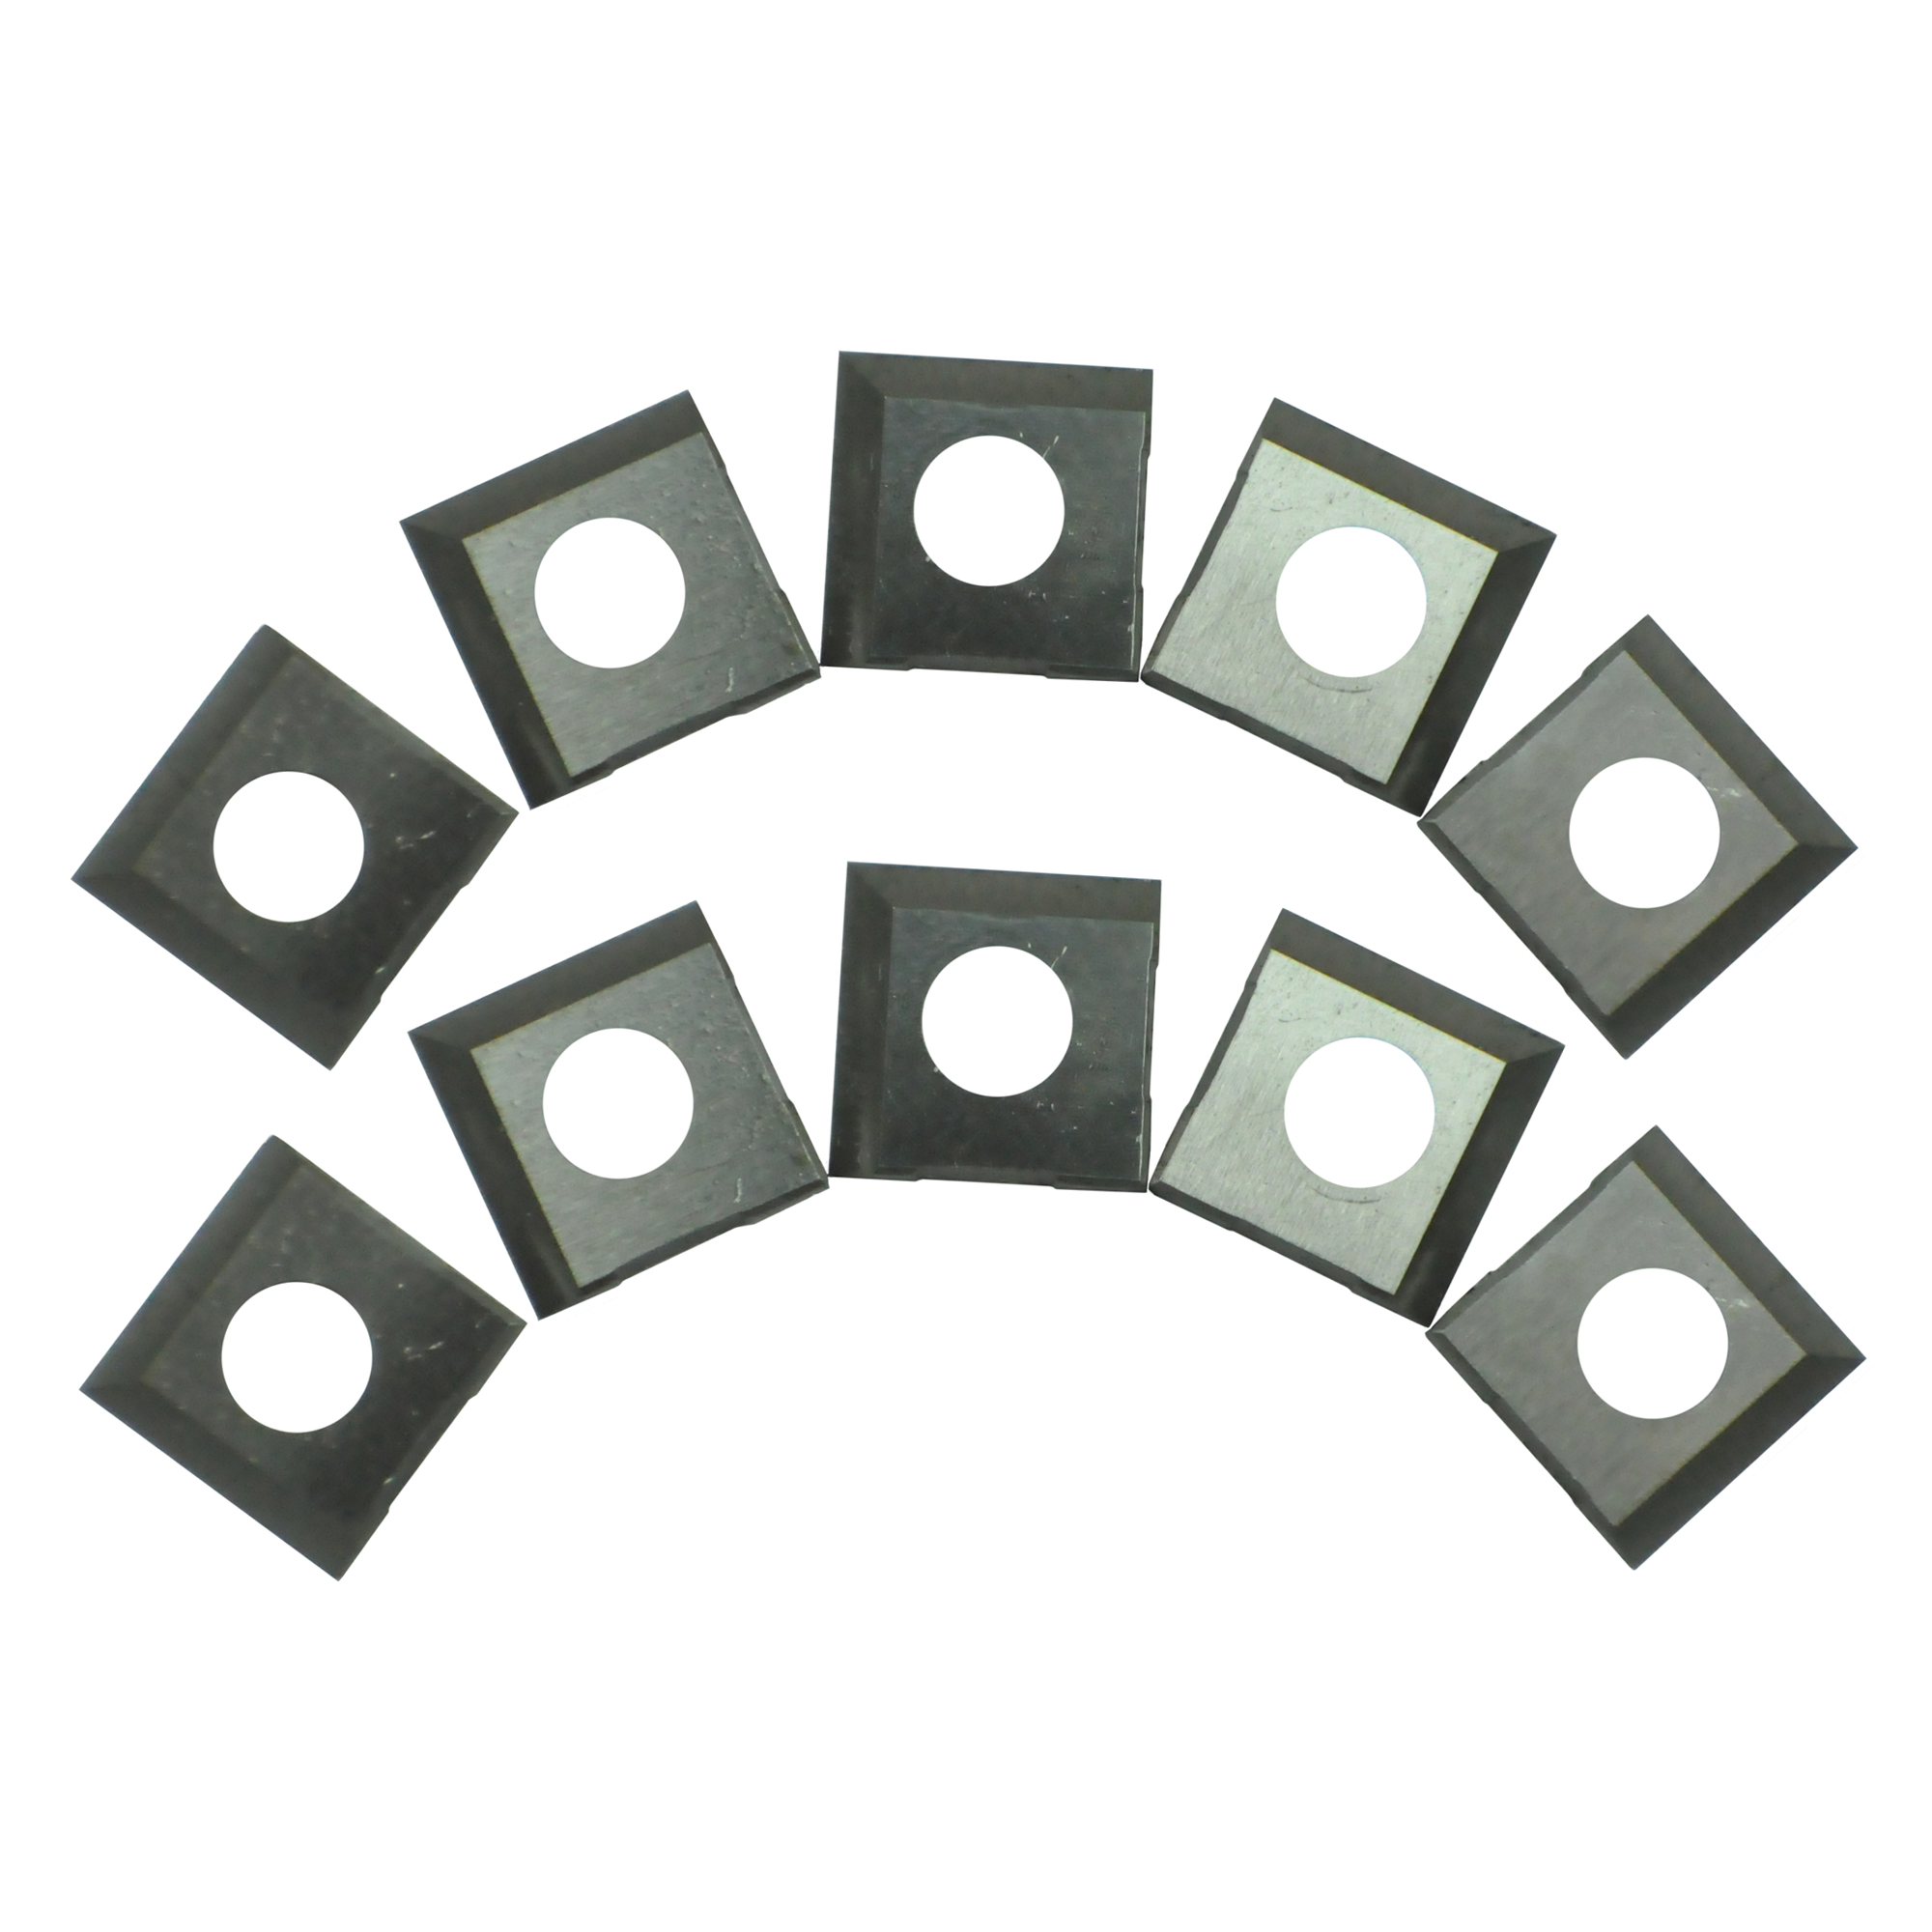 15mm x 15mm x 2.5mm Square 30 Deg 4 Sided TCT Insert Blade (10Pce) suit Spiral Cutter Head by Toughcut